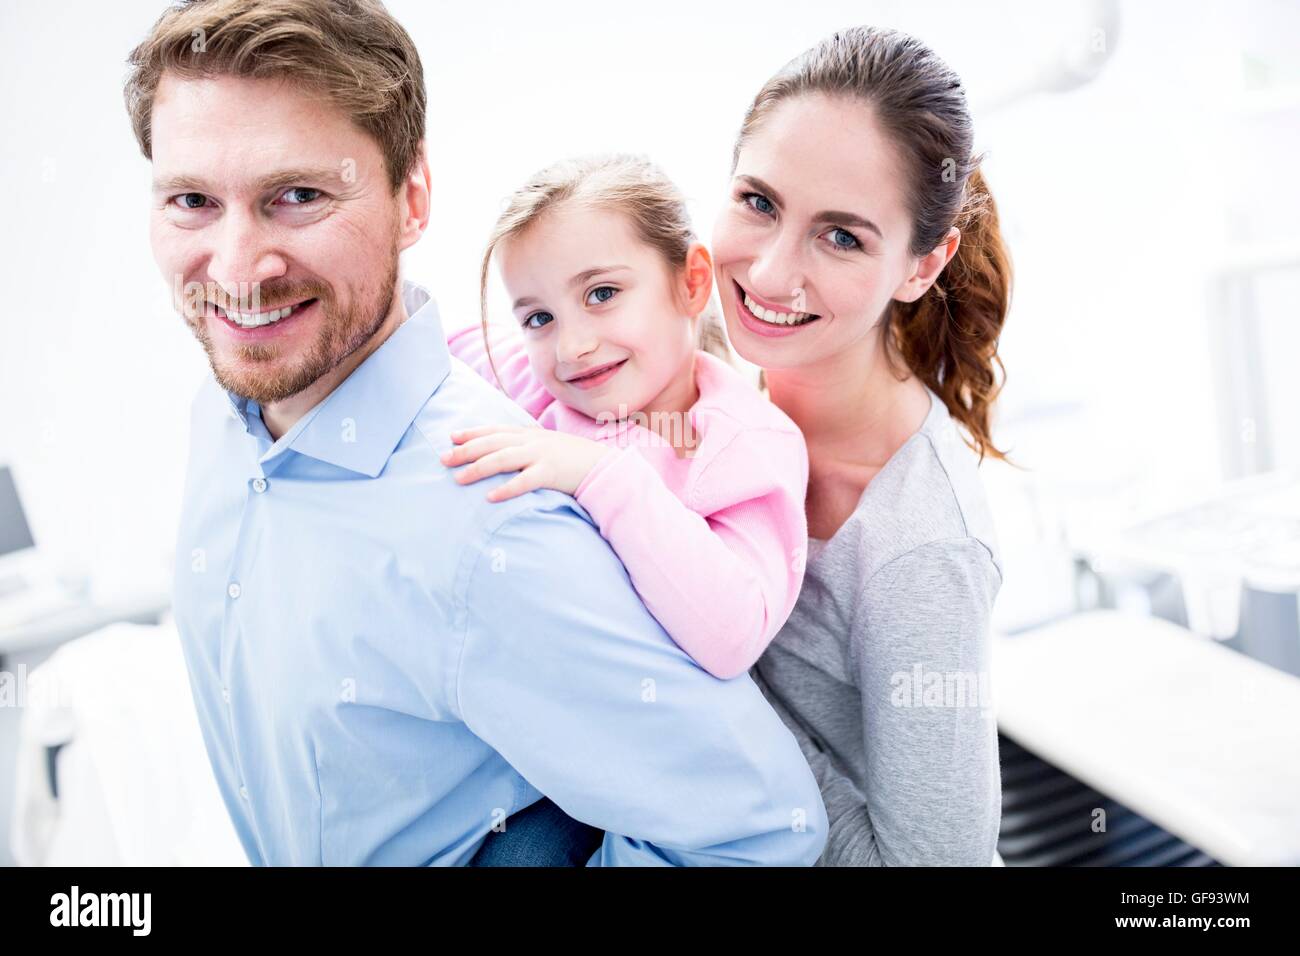 MODEL RELEASED. Portrait of dentist and dental assistant playing with girl in clinic, smiling. Stock Photo